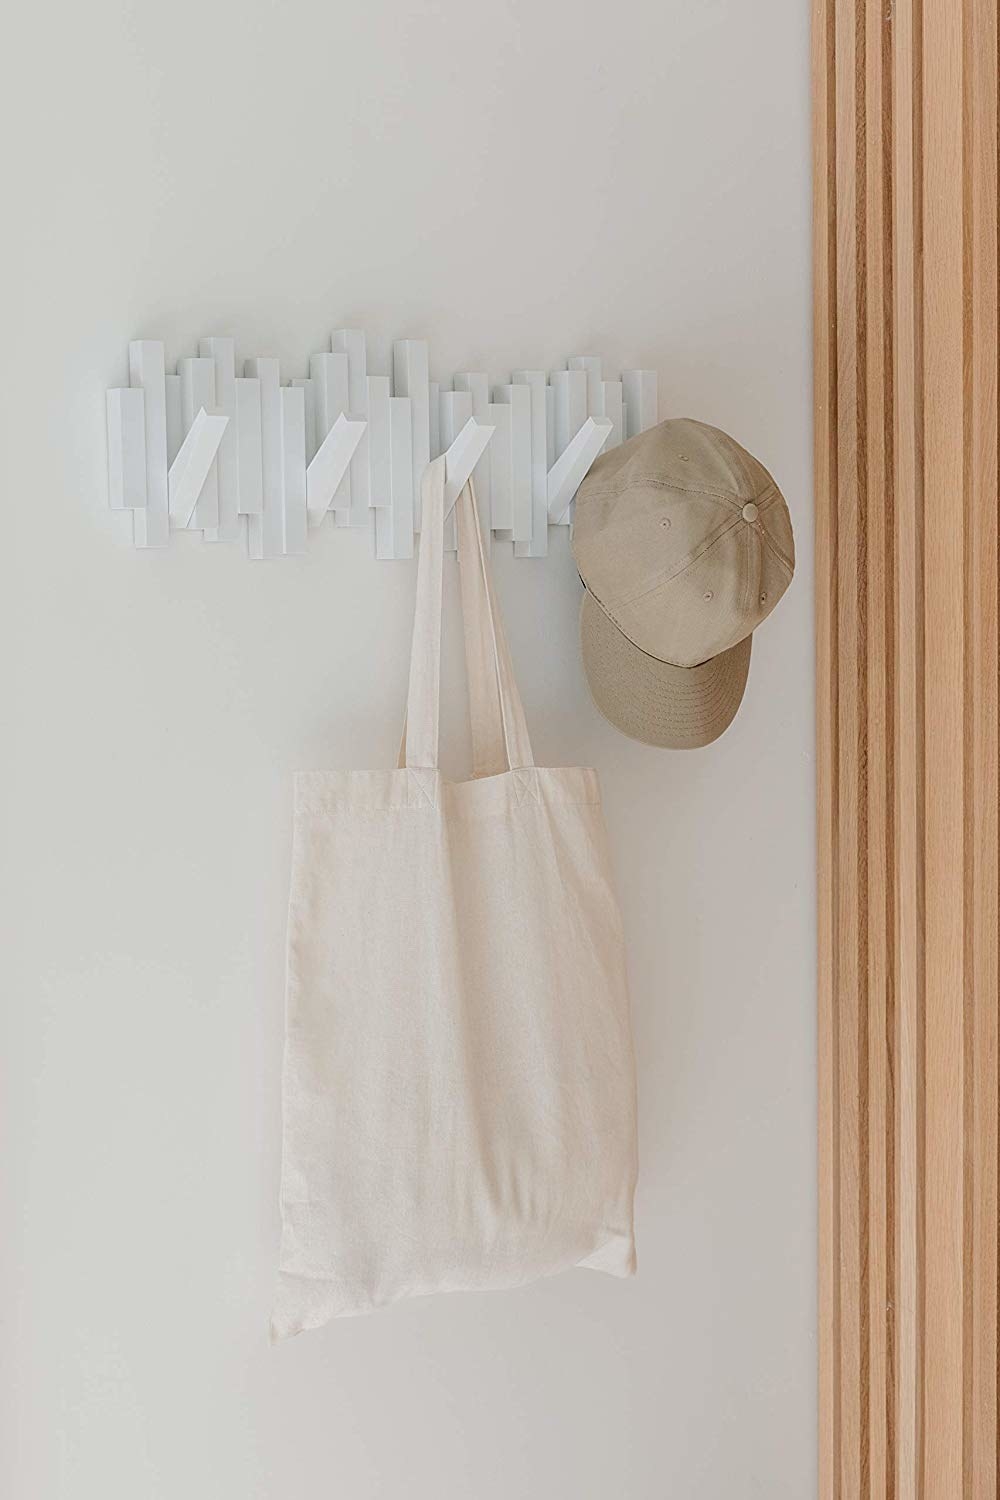 The white hanger, made with abstract blocks, holding a baseball cap and a canvas tote bag